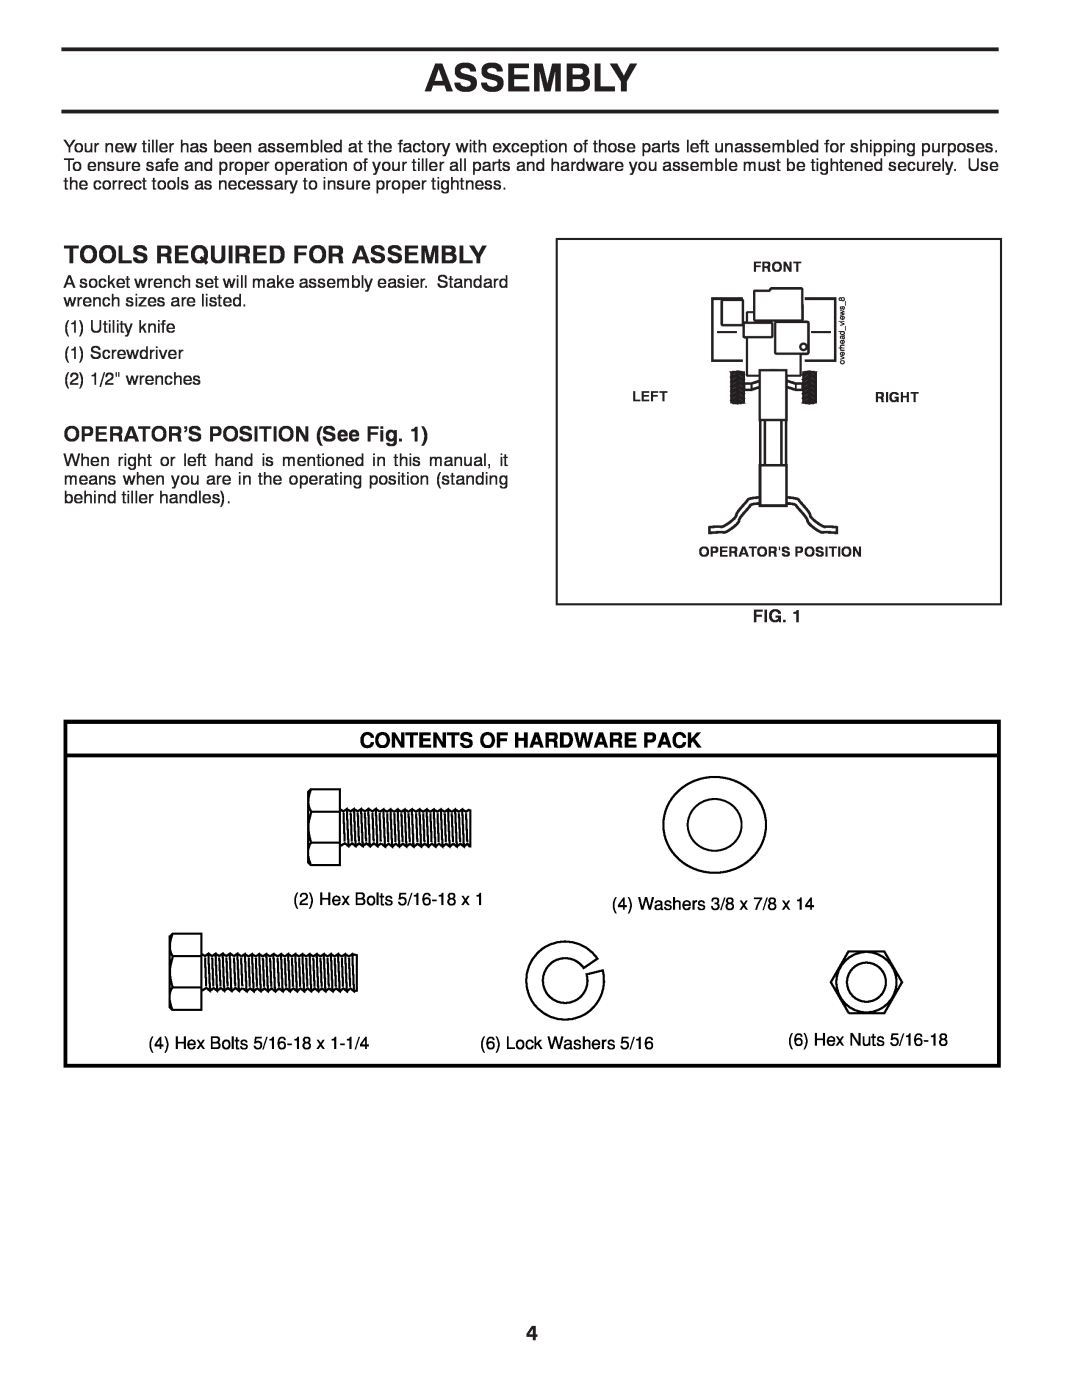 Poulan 413288 manual Tools Required For Assembly, OPERATOR’S POSITION See Fig, Contents Of Hardware Pack 